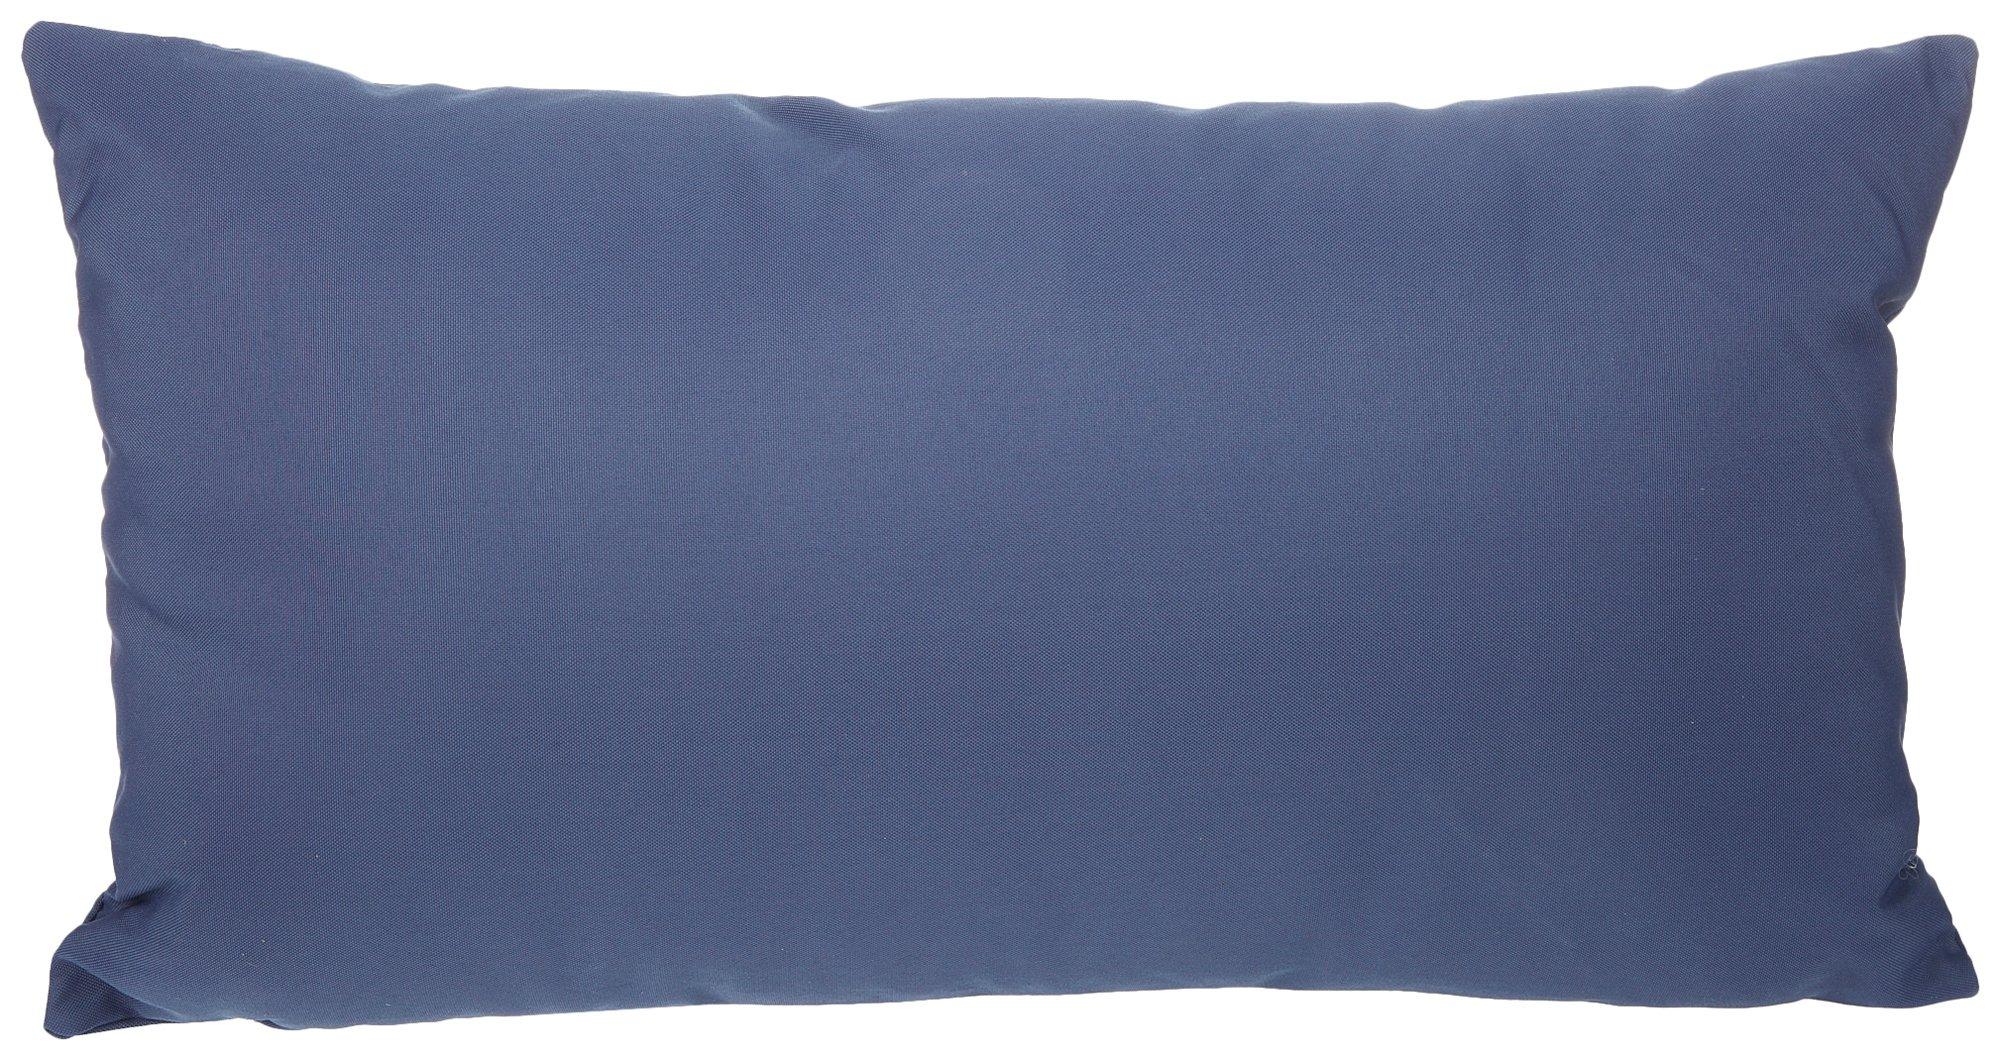 Waverly 12x24 Solid Outdoor Pillow